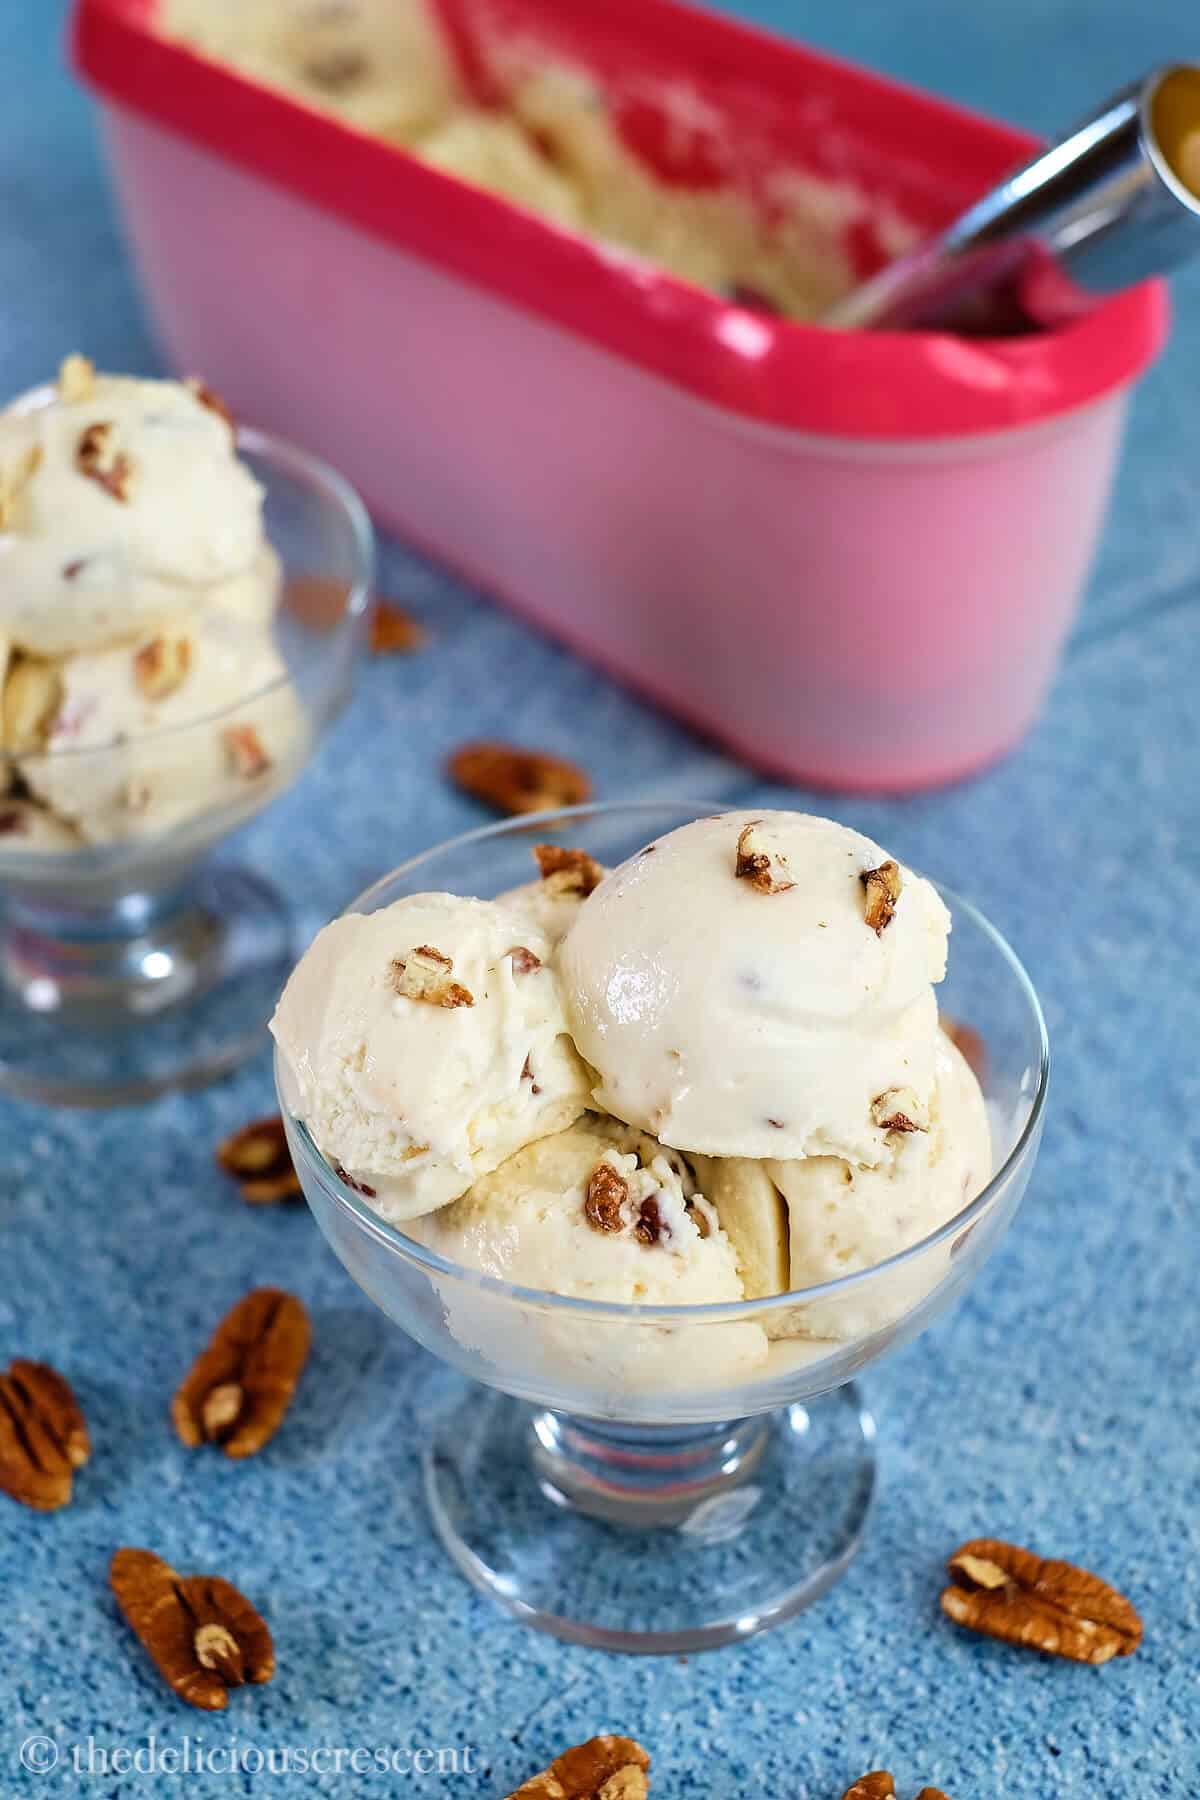 https://www.thedeliciouscrescent.com/wp-content/uploads/2023/03/Maple-Ice-Cream-1.jpg